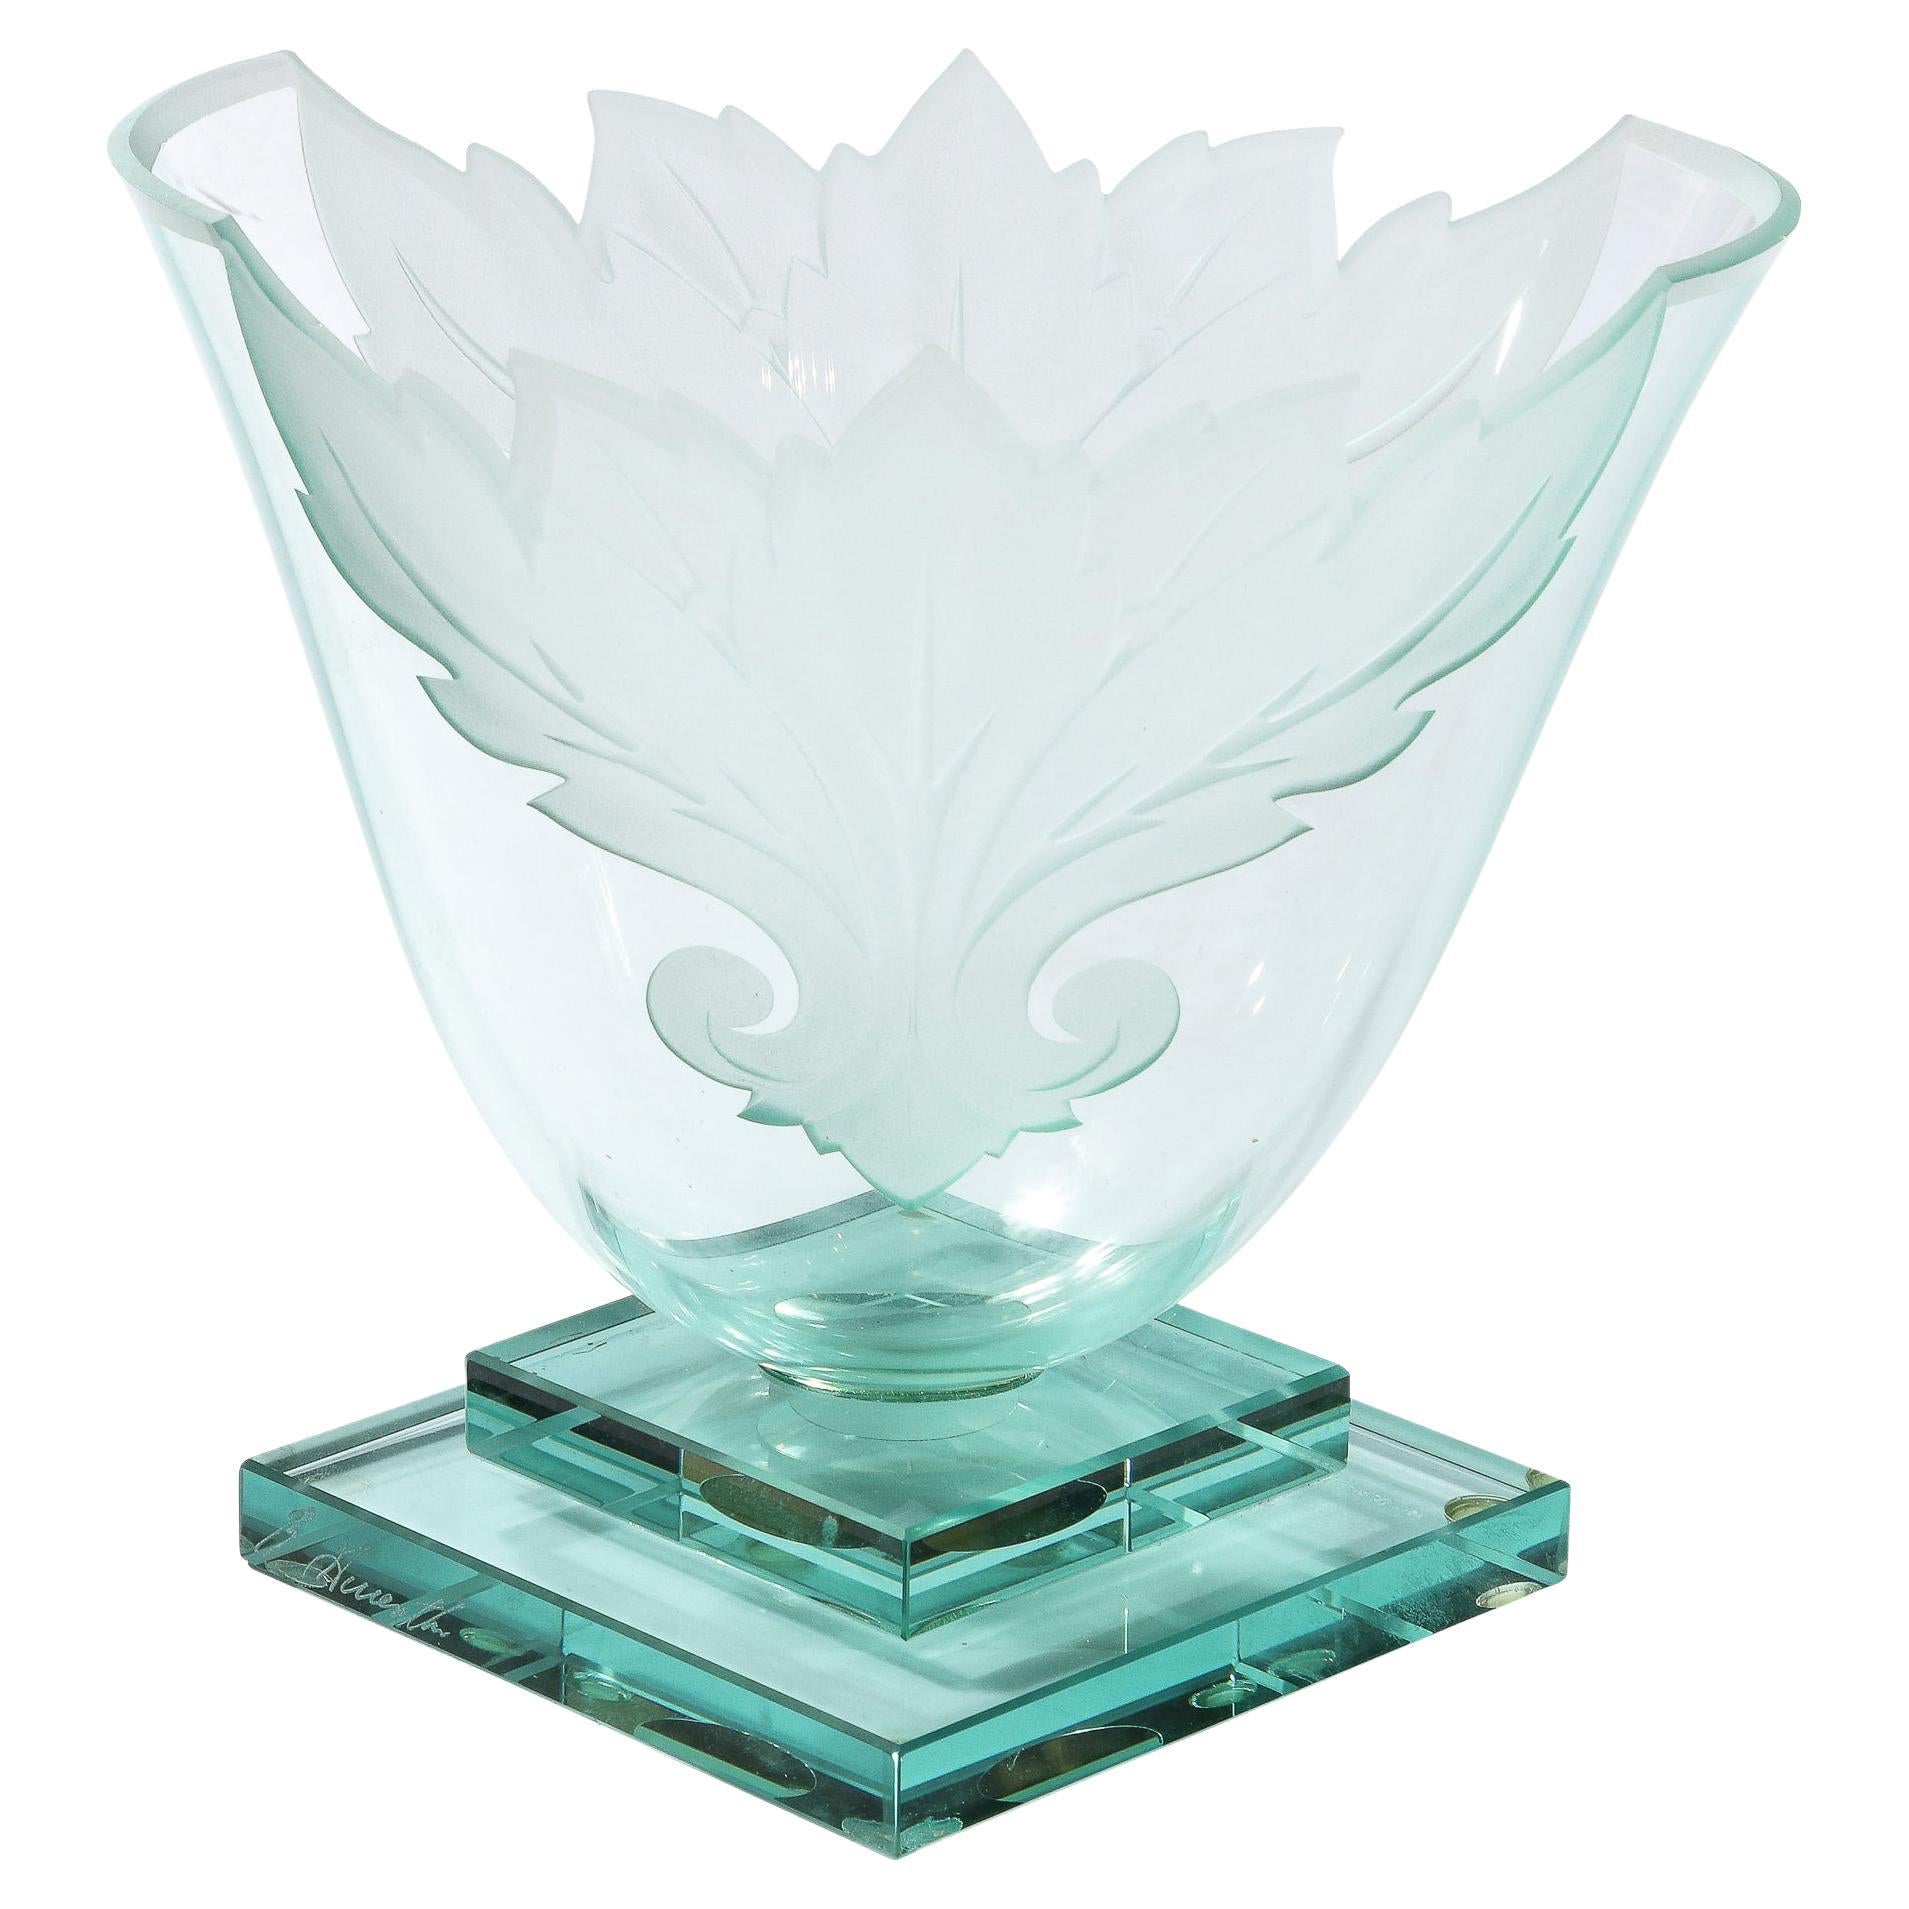 Frosted and Etched Cut Glass Leaf Vase/Bowl on Geometric Base by Robert Guenther For Sale